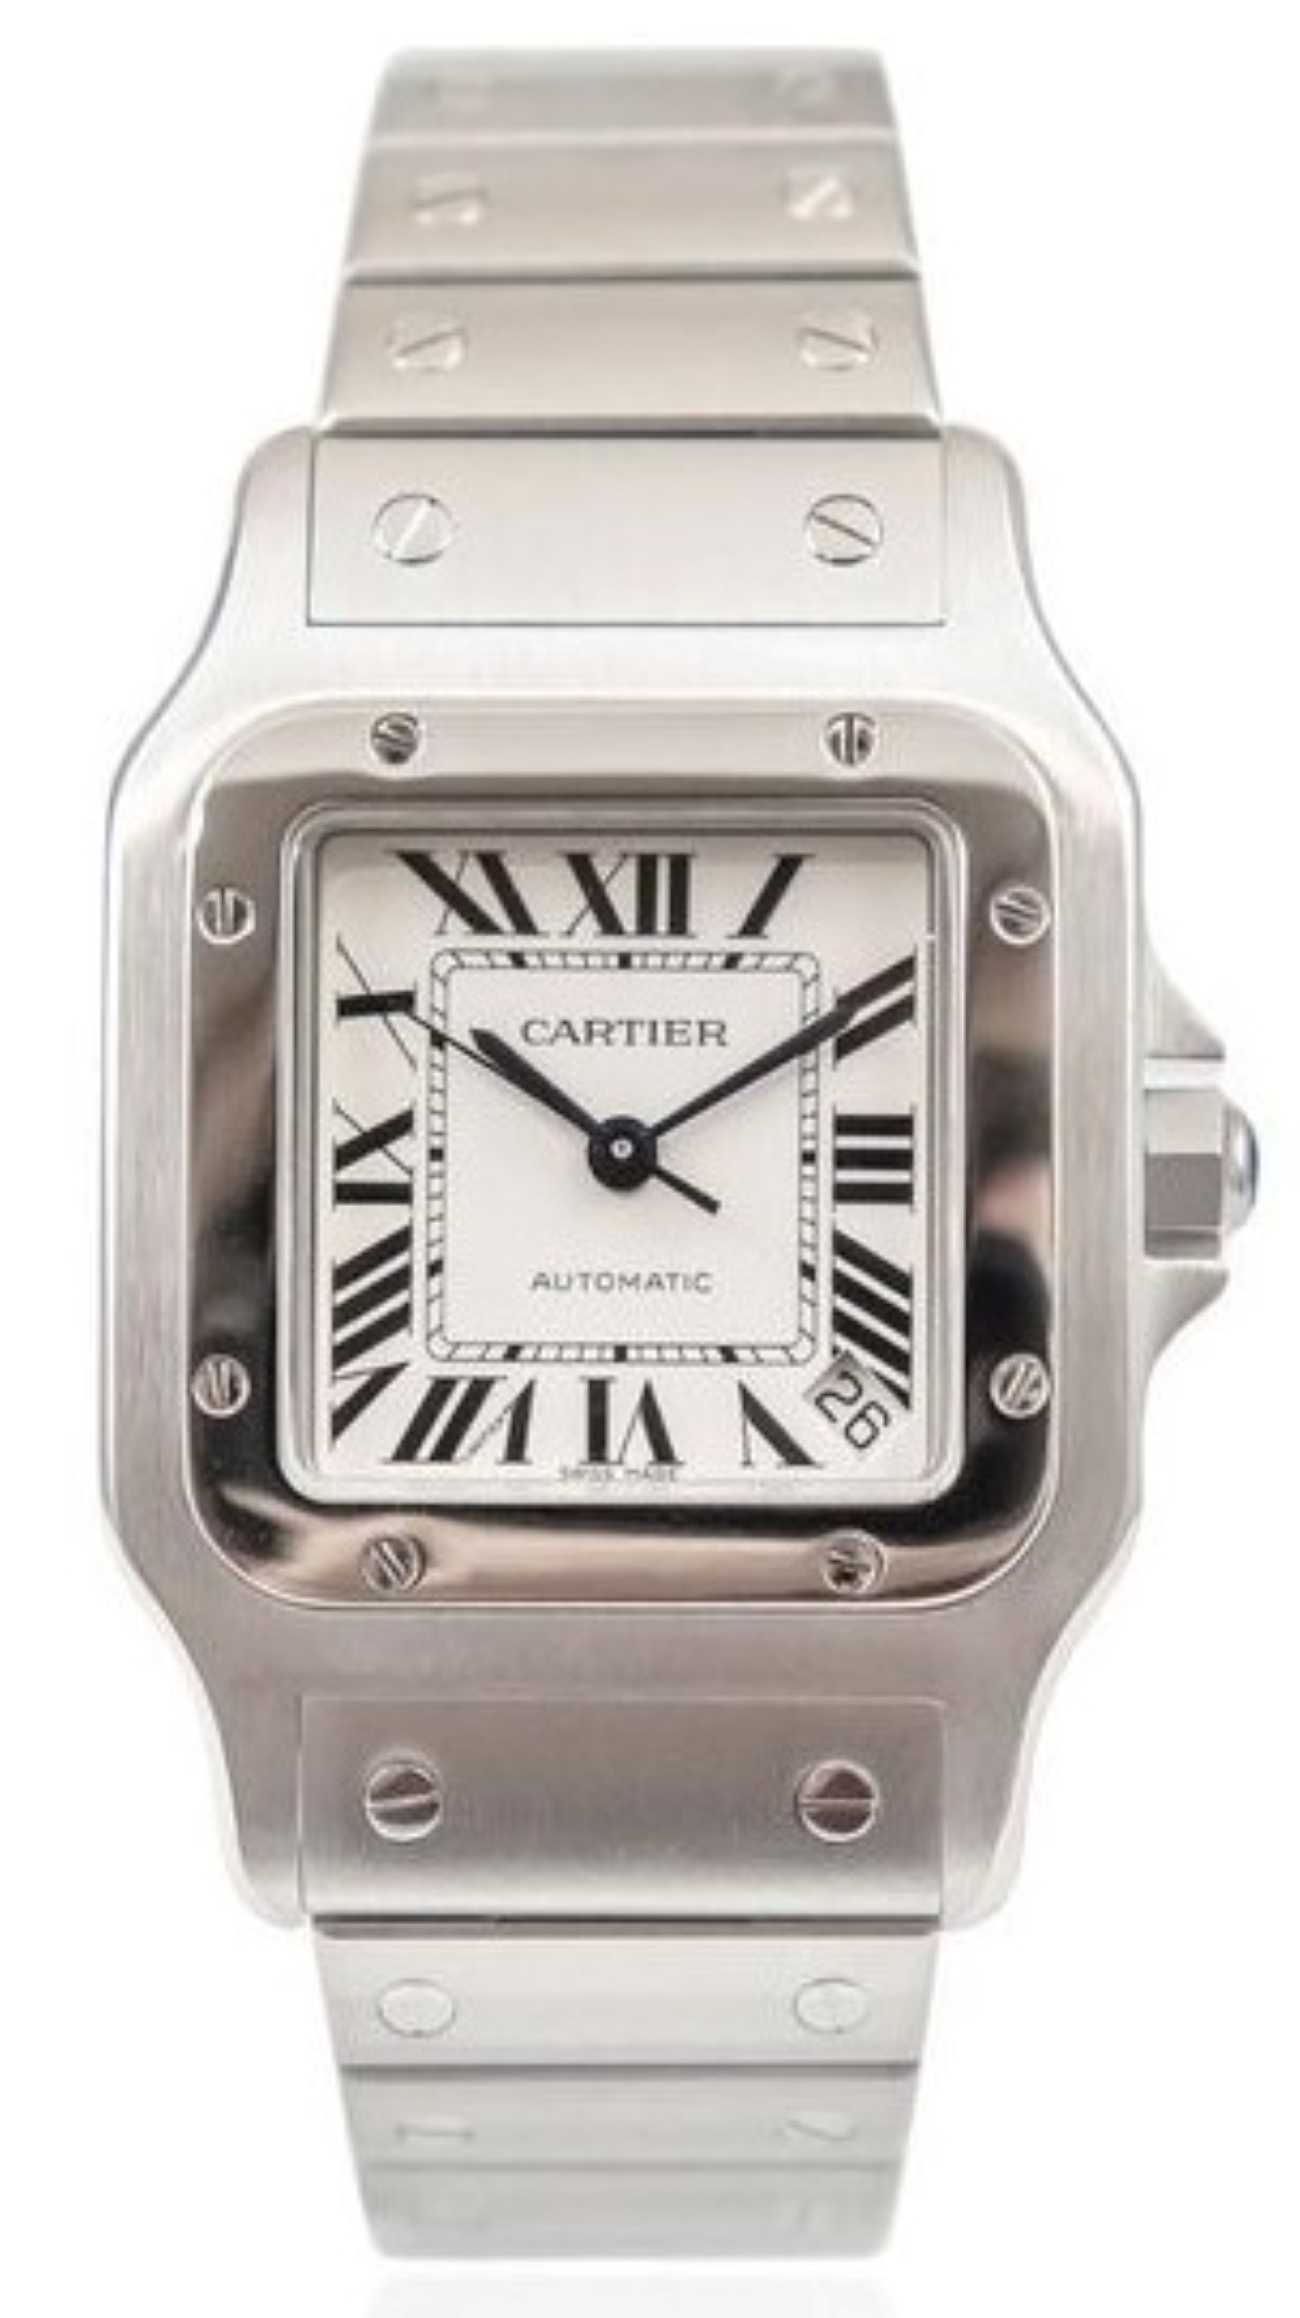 CARTIER SANTOS GALBEE XL 32x45MM AUTOMATIC STAINLESS STEEL REF: 2823